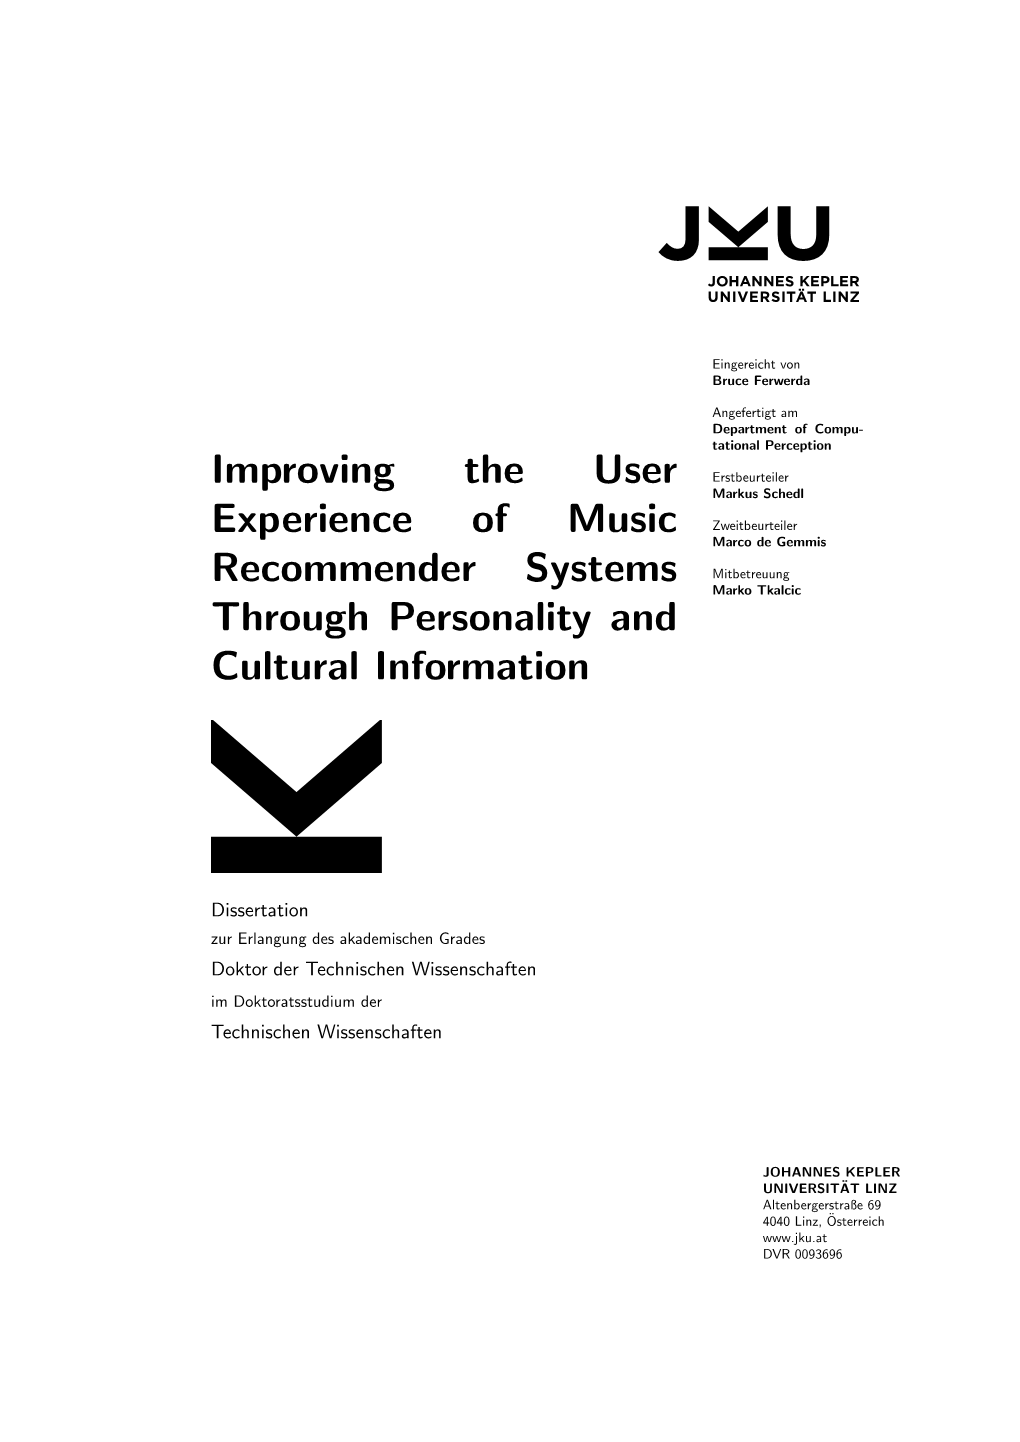 Improving the User Experience of Music Recommender Systems